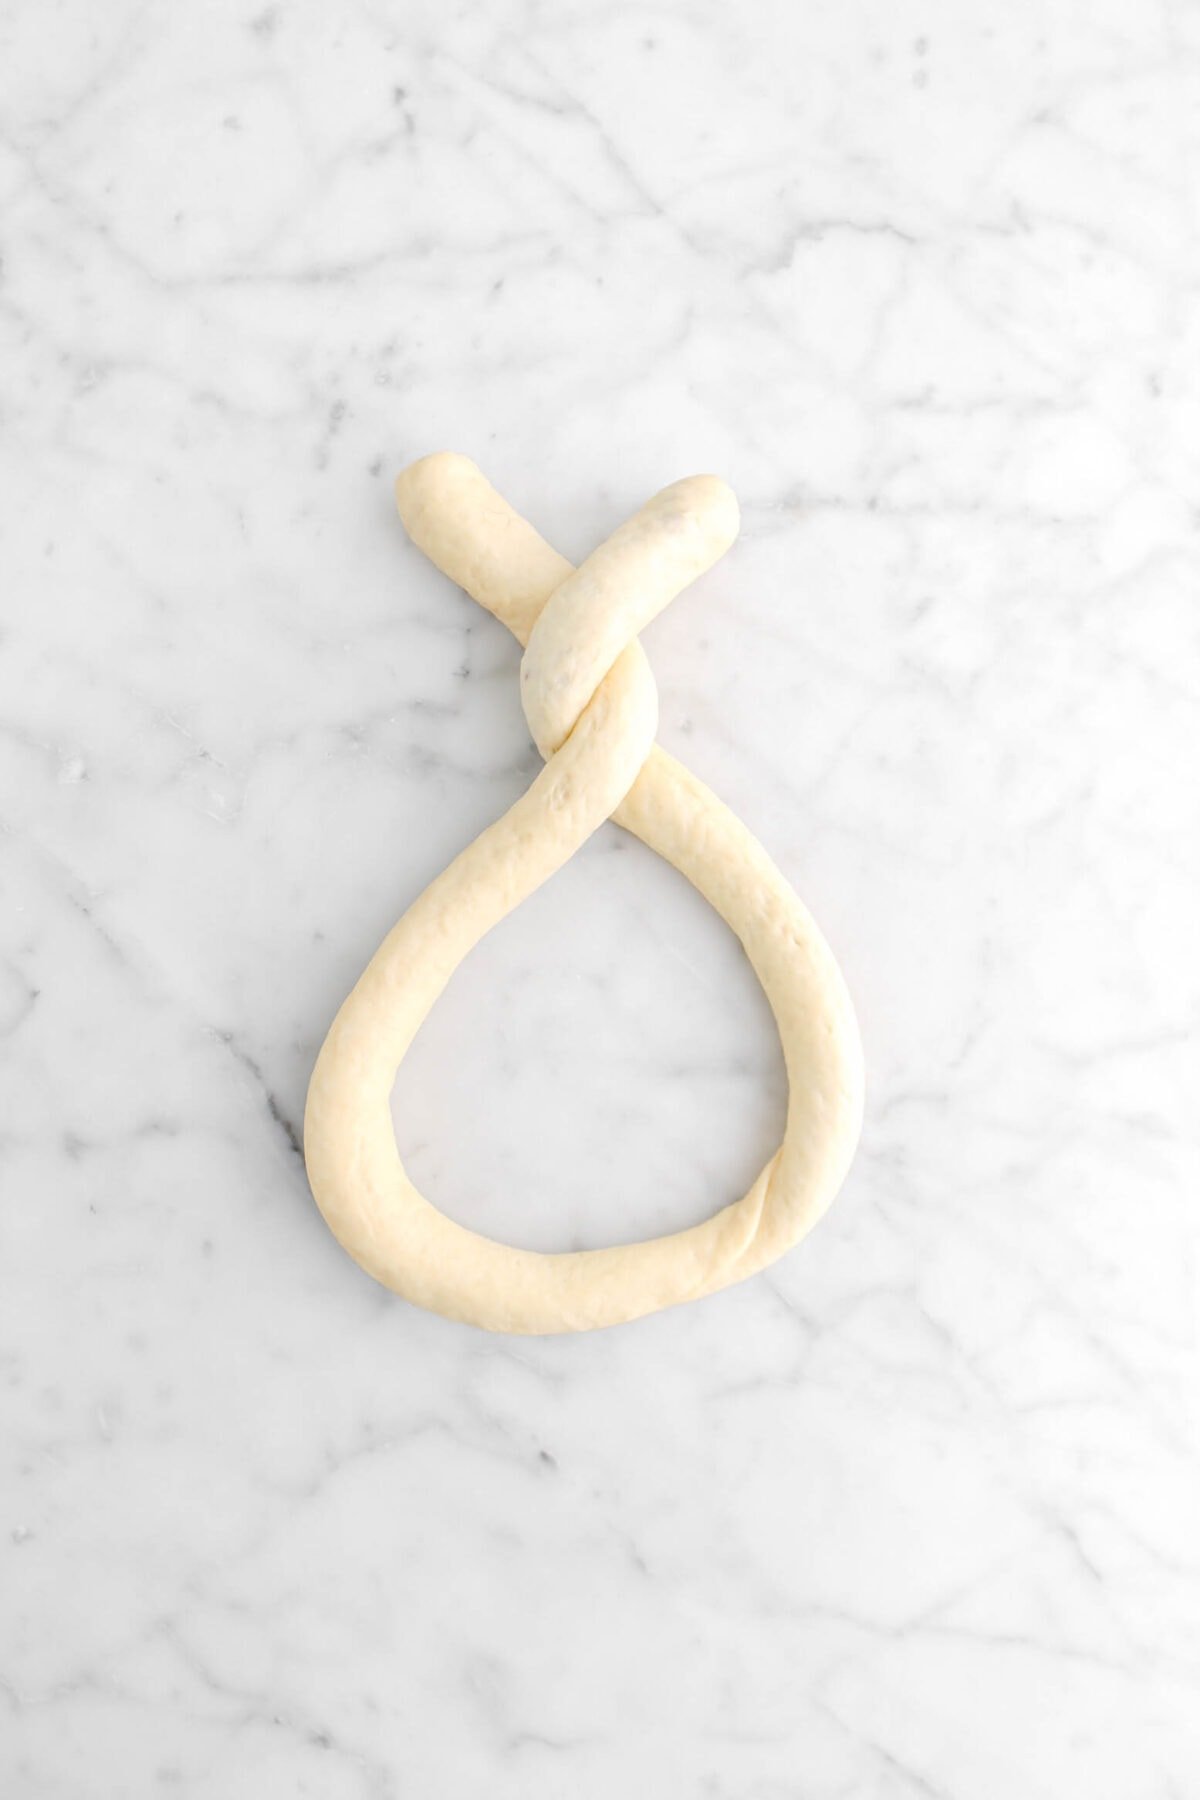 two ends twisted around each other creating a ring shape on marble surface